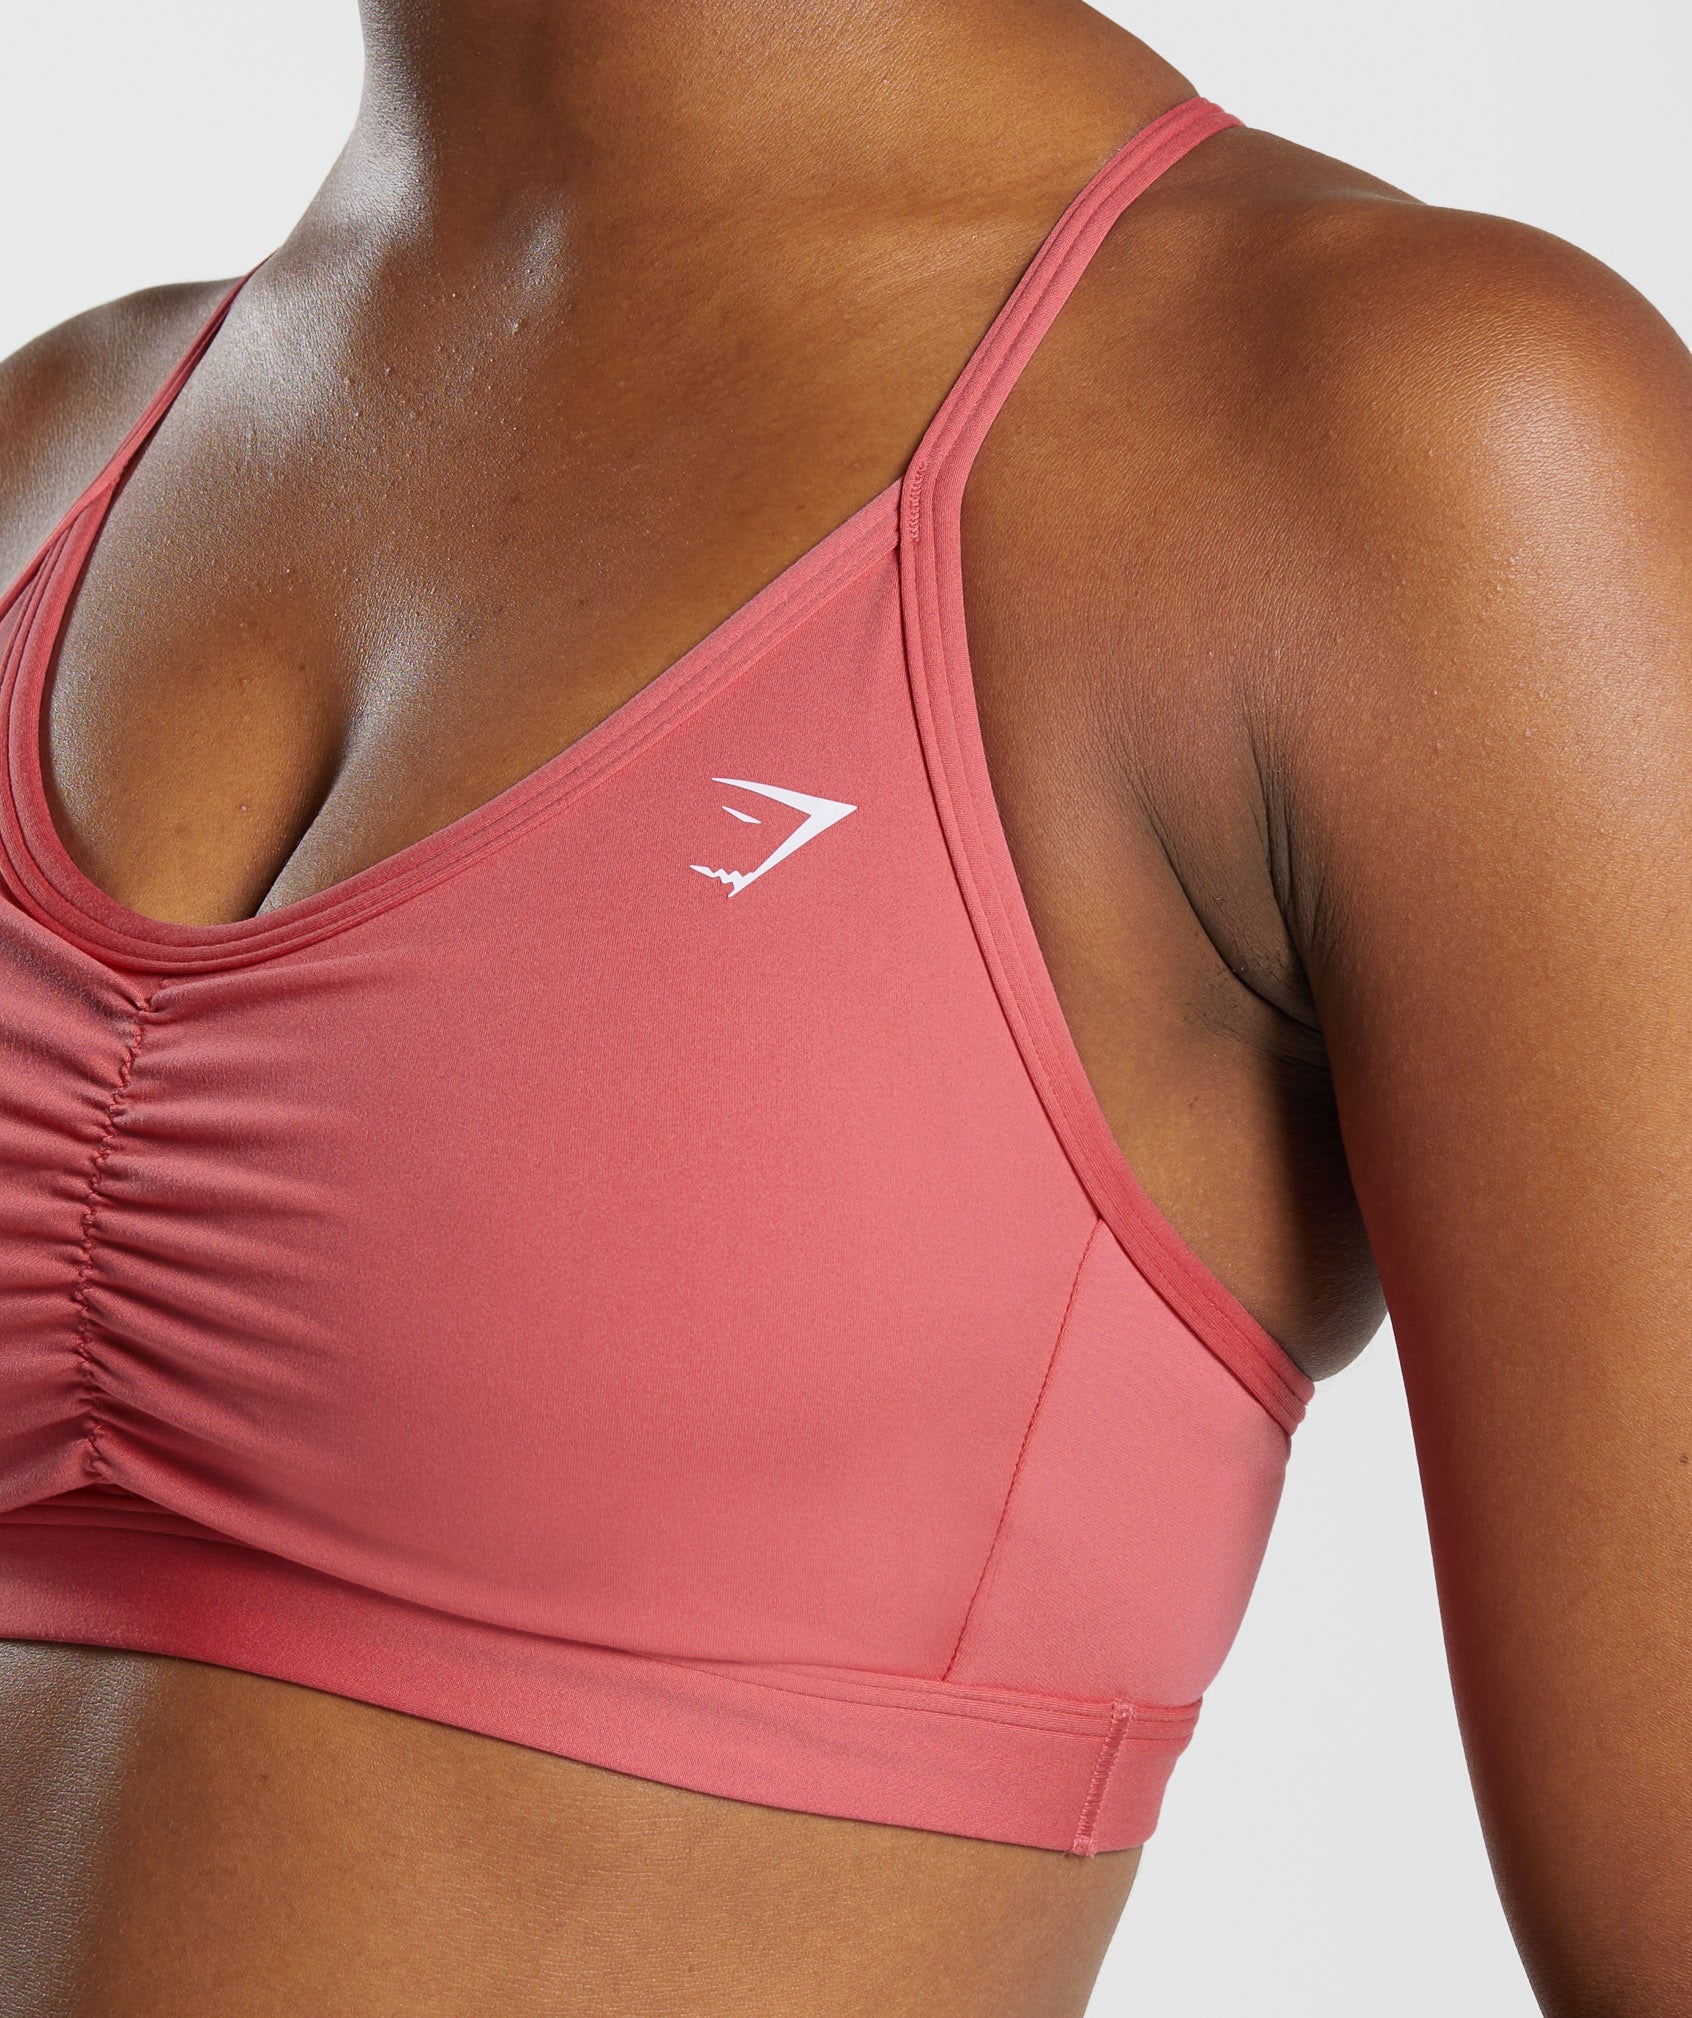 Ruched Sports Bra in Sunbaked Pink - view 5